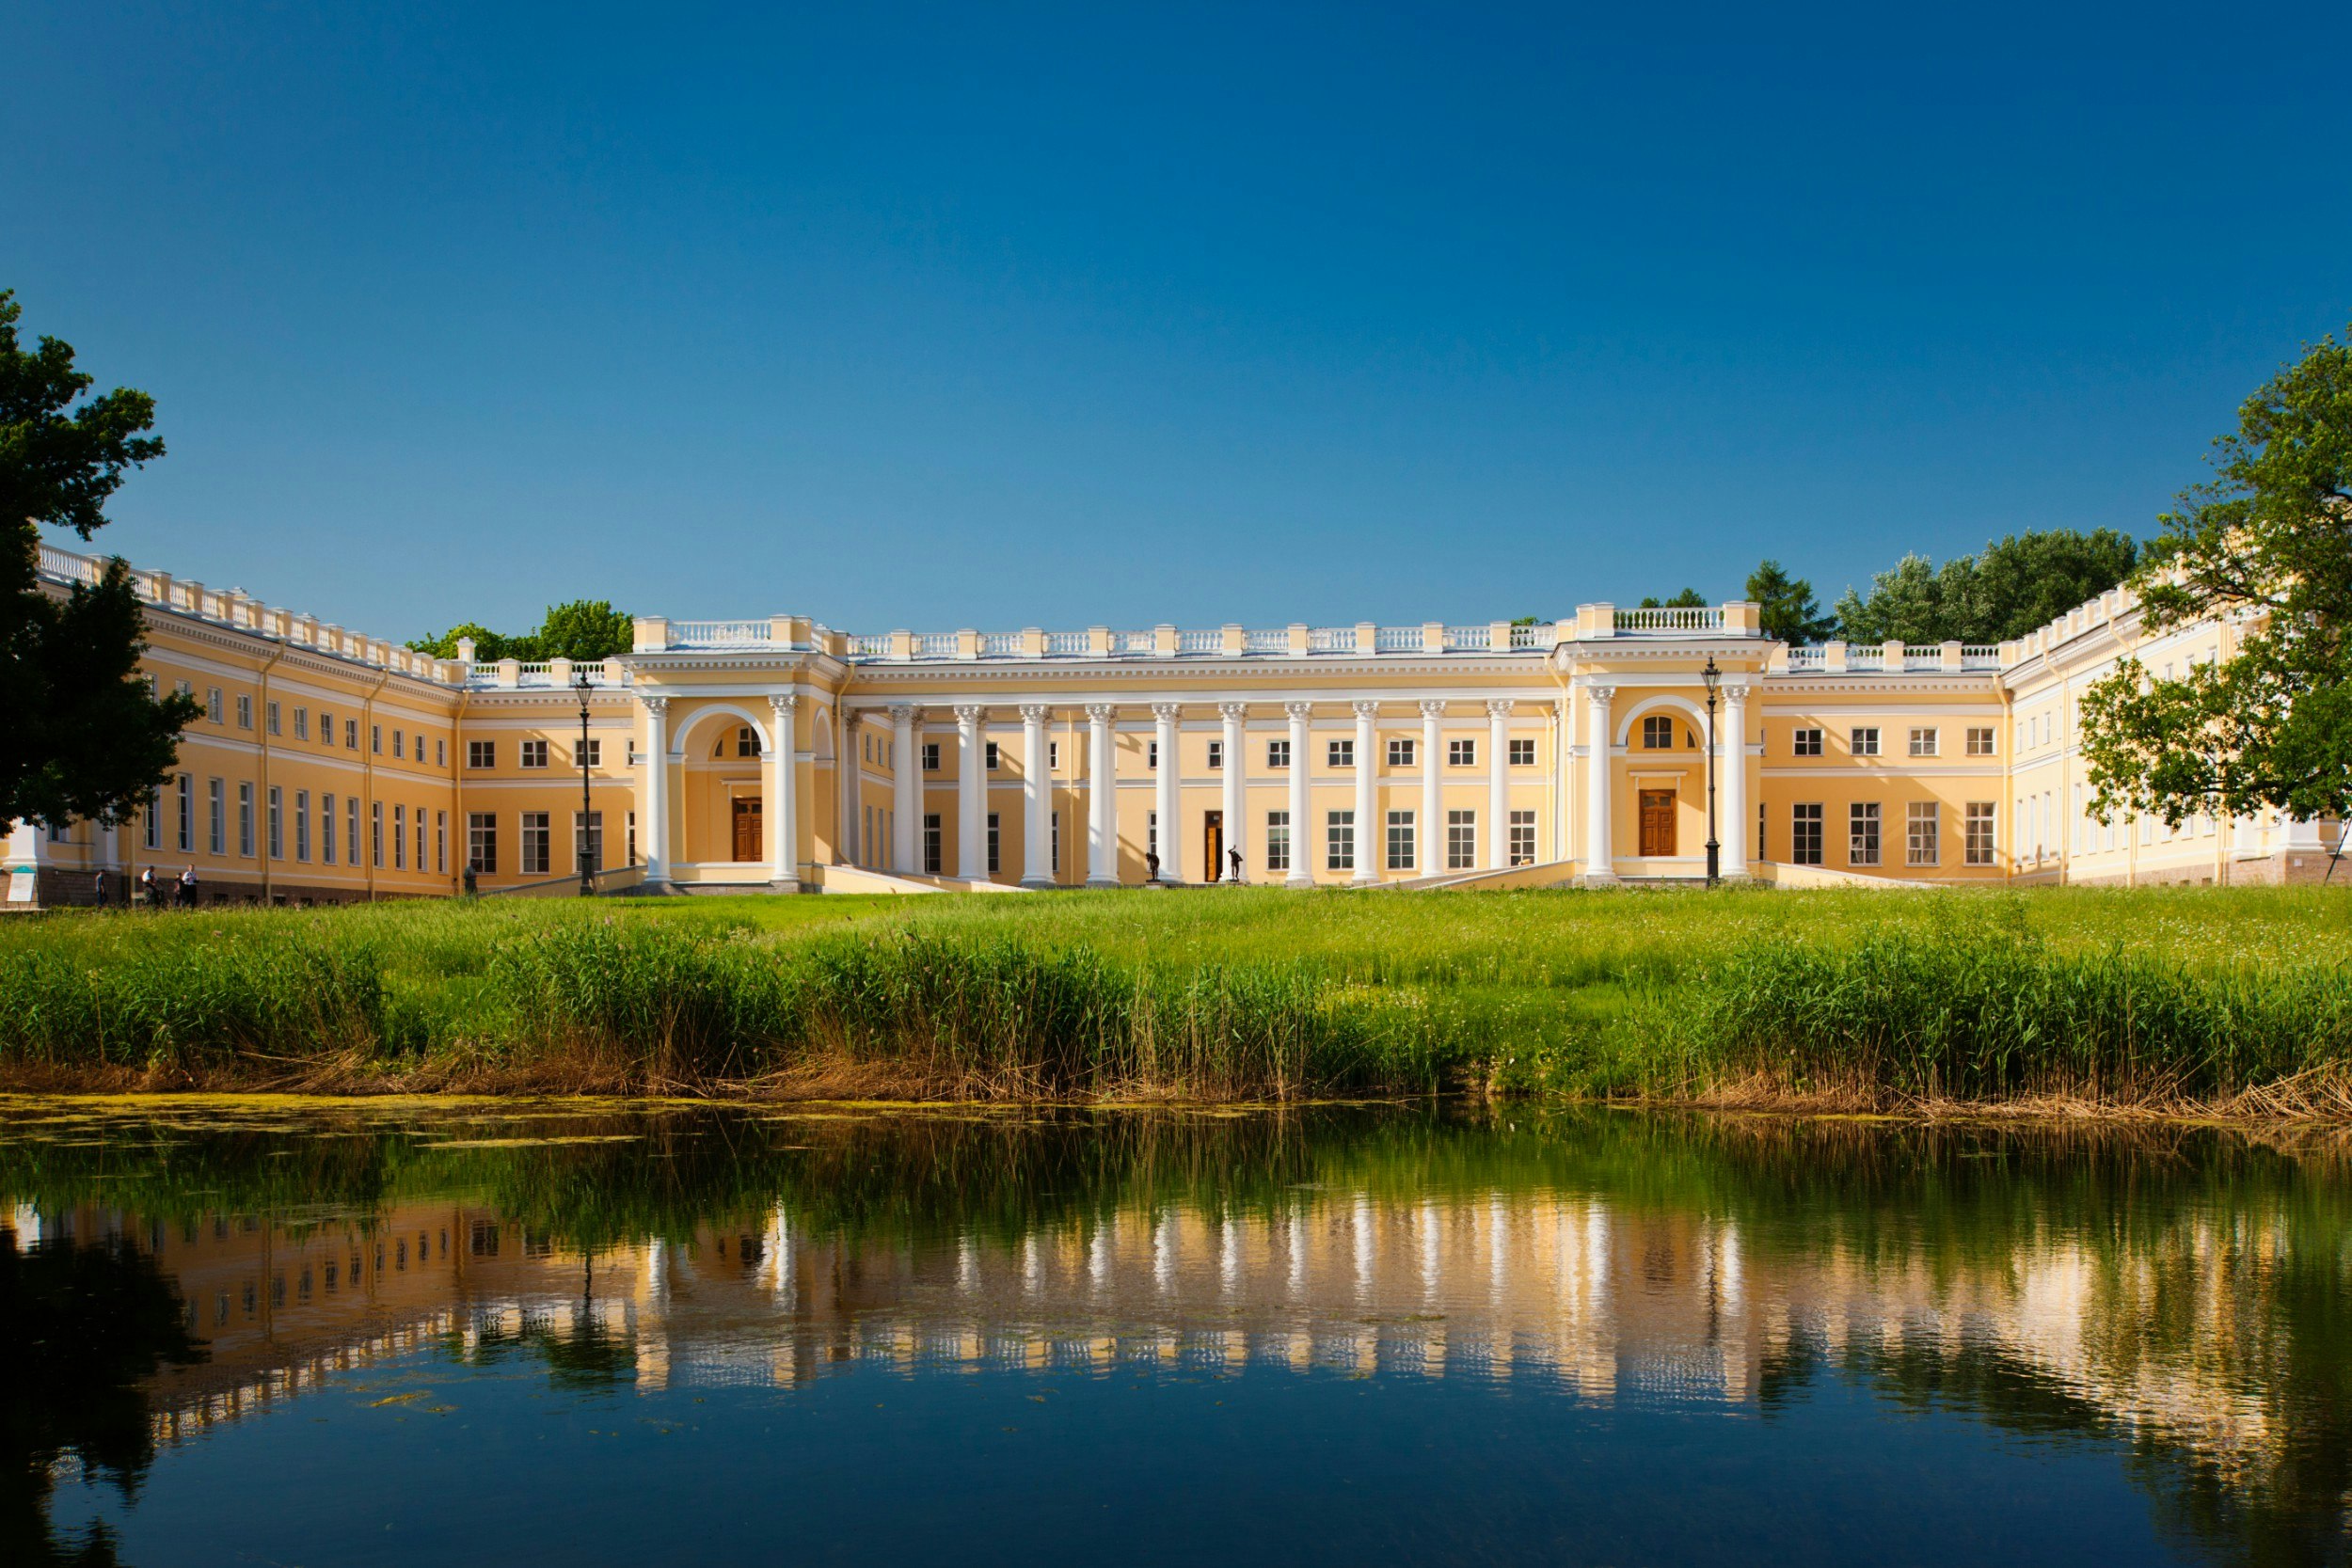 Alexander Palace in Russia with its reflection in a lake